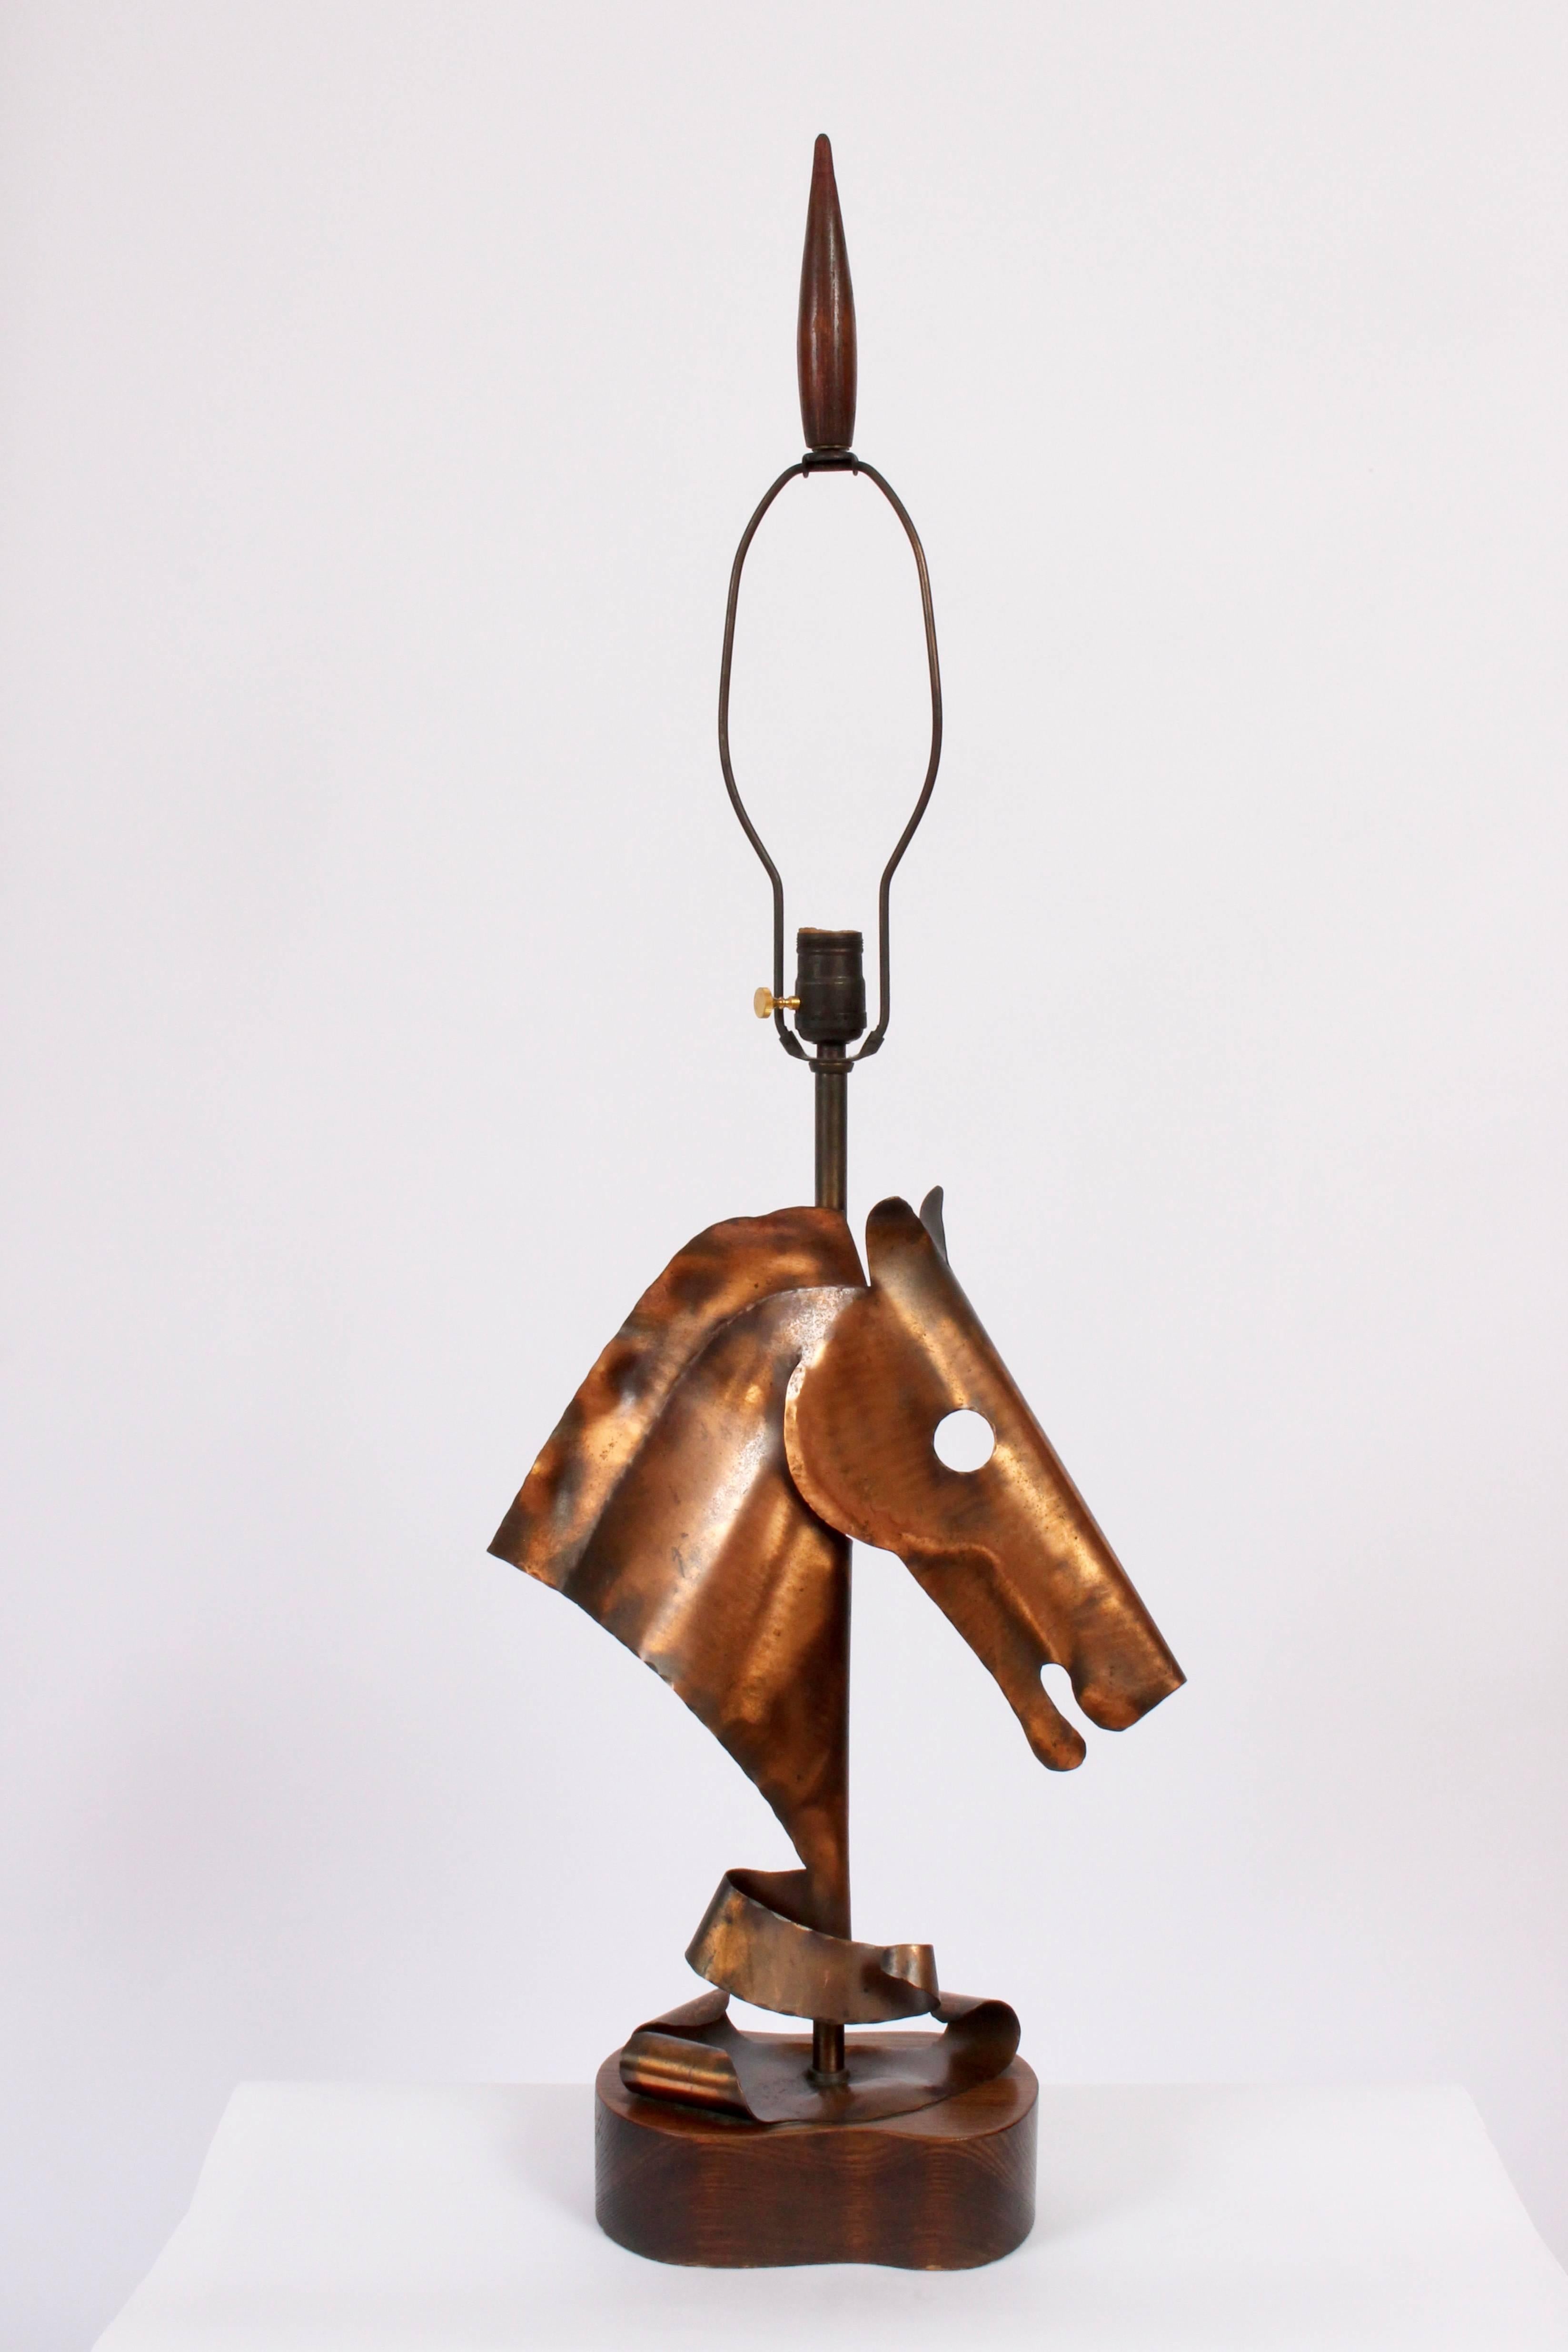 American Yasha Heifetz Horse Head Table Lamp in Hammered Copper, Circa 1950 For Sale